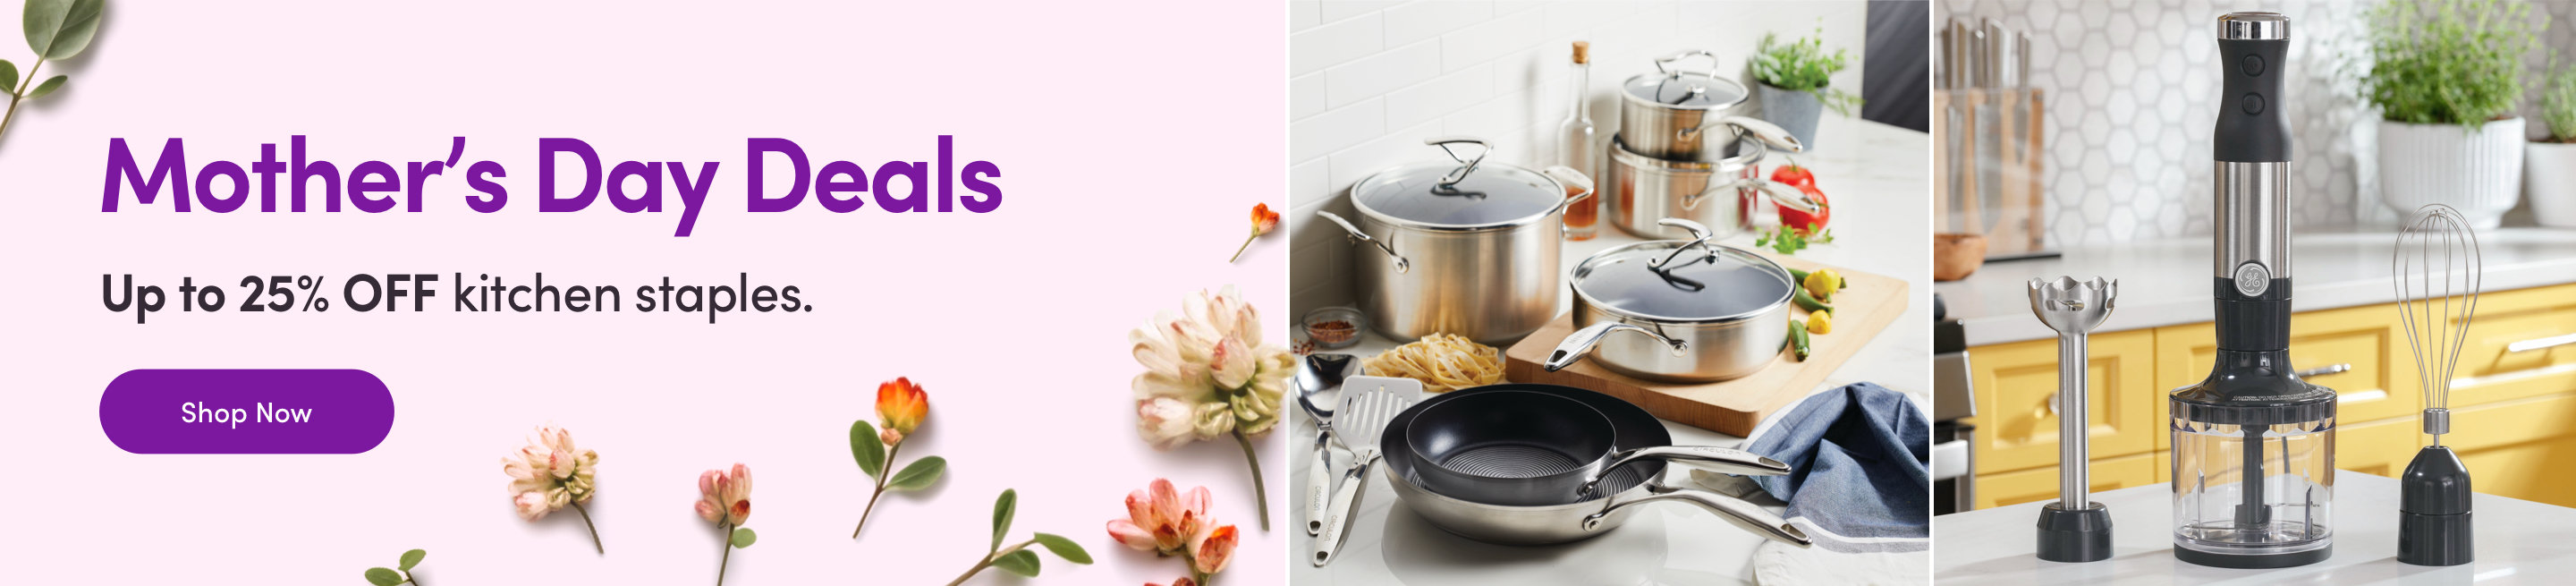 Mother's Day Deals. Up to 25% OFF kitchen staples. Shop Now. 